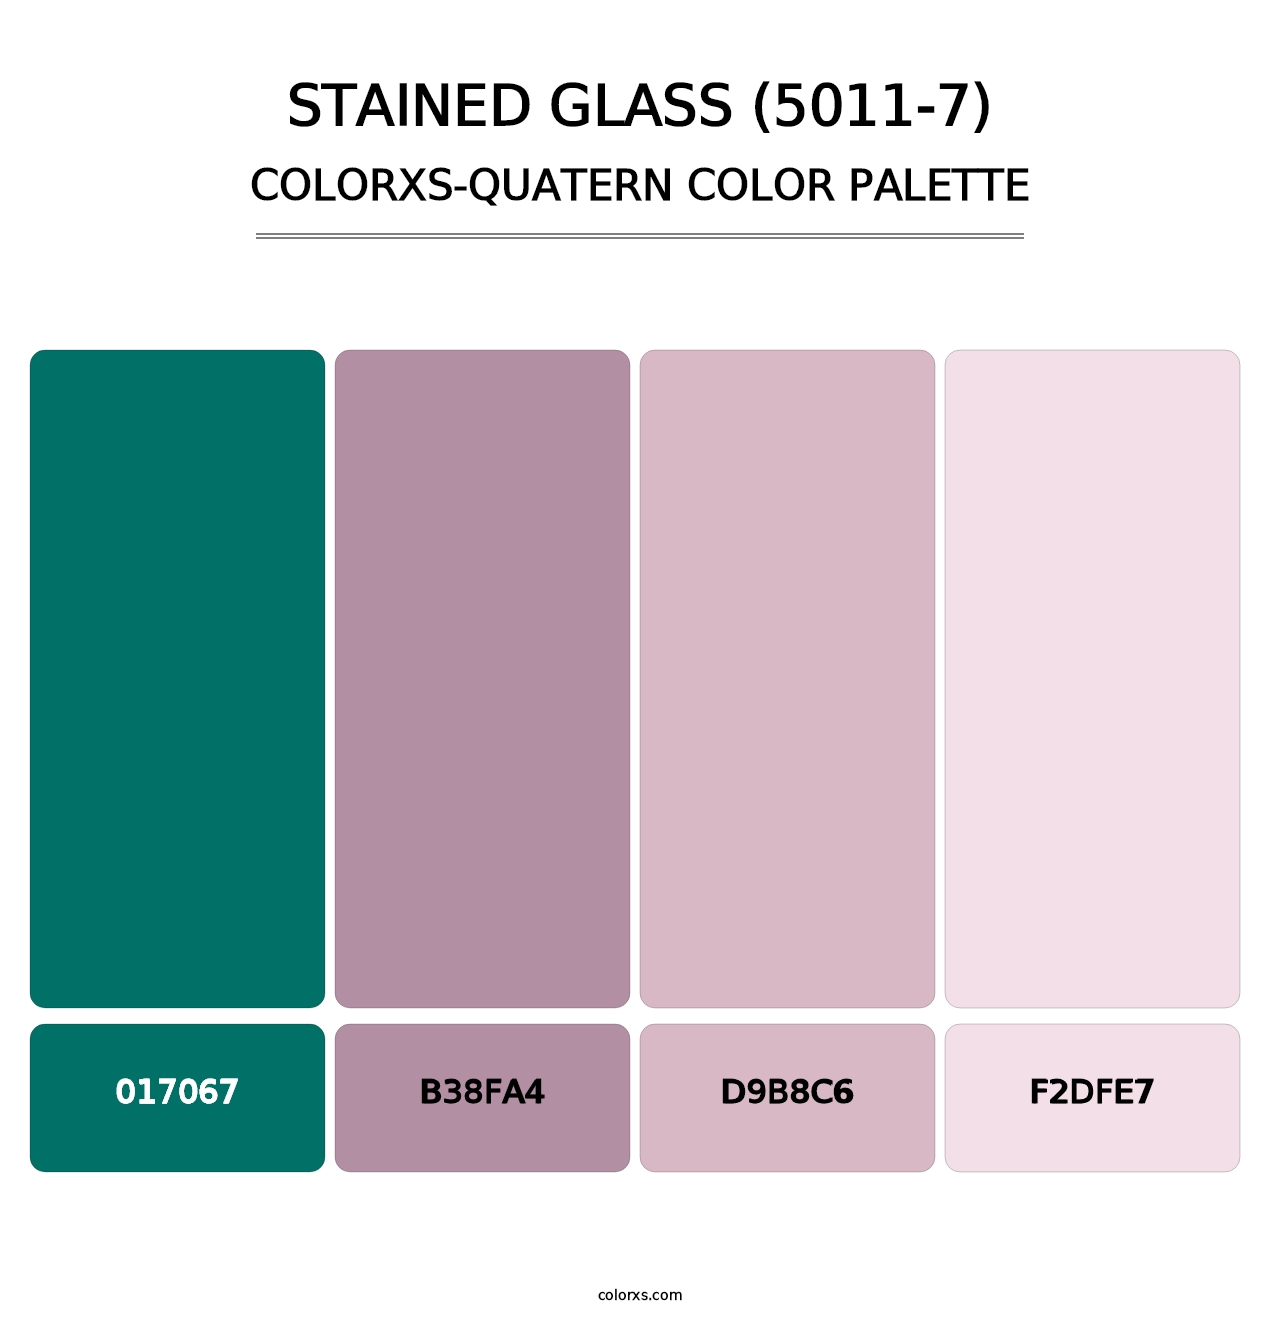 Stained Glass (5011-7) - Colorxs Quatern Palette